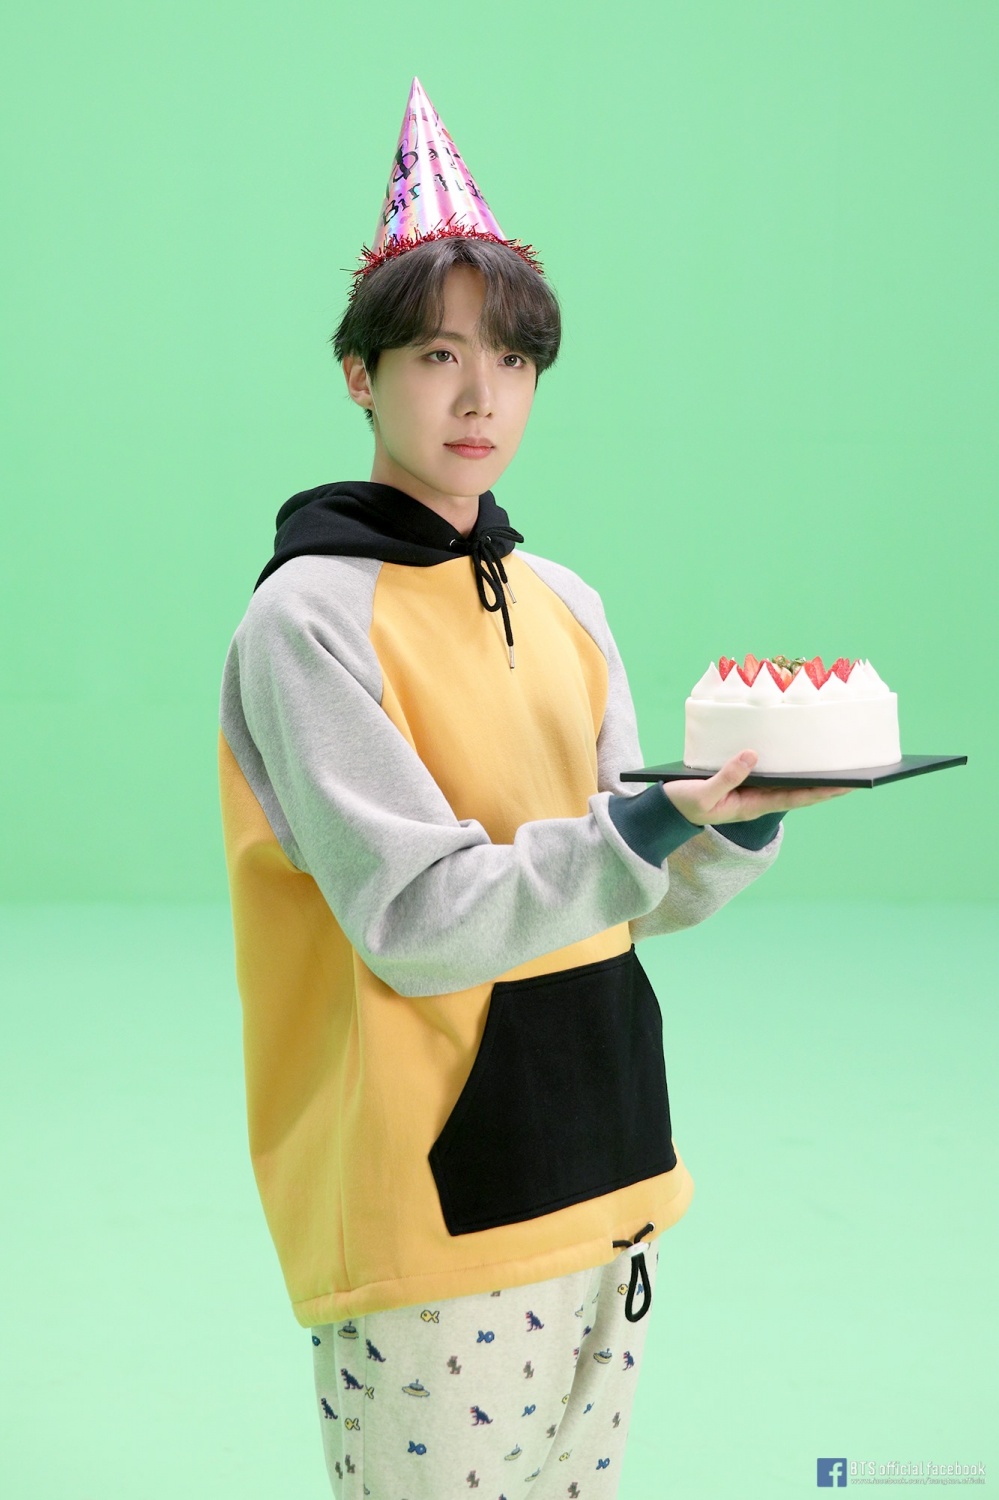 Happy Birthday J-Hope! K-Pop ARMY Flood Twitter With Pics and Videos of BTS  Member While Wishing Their 'Sunshine' on His Special Day